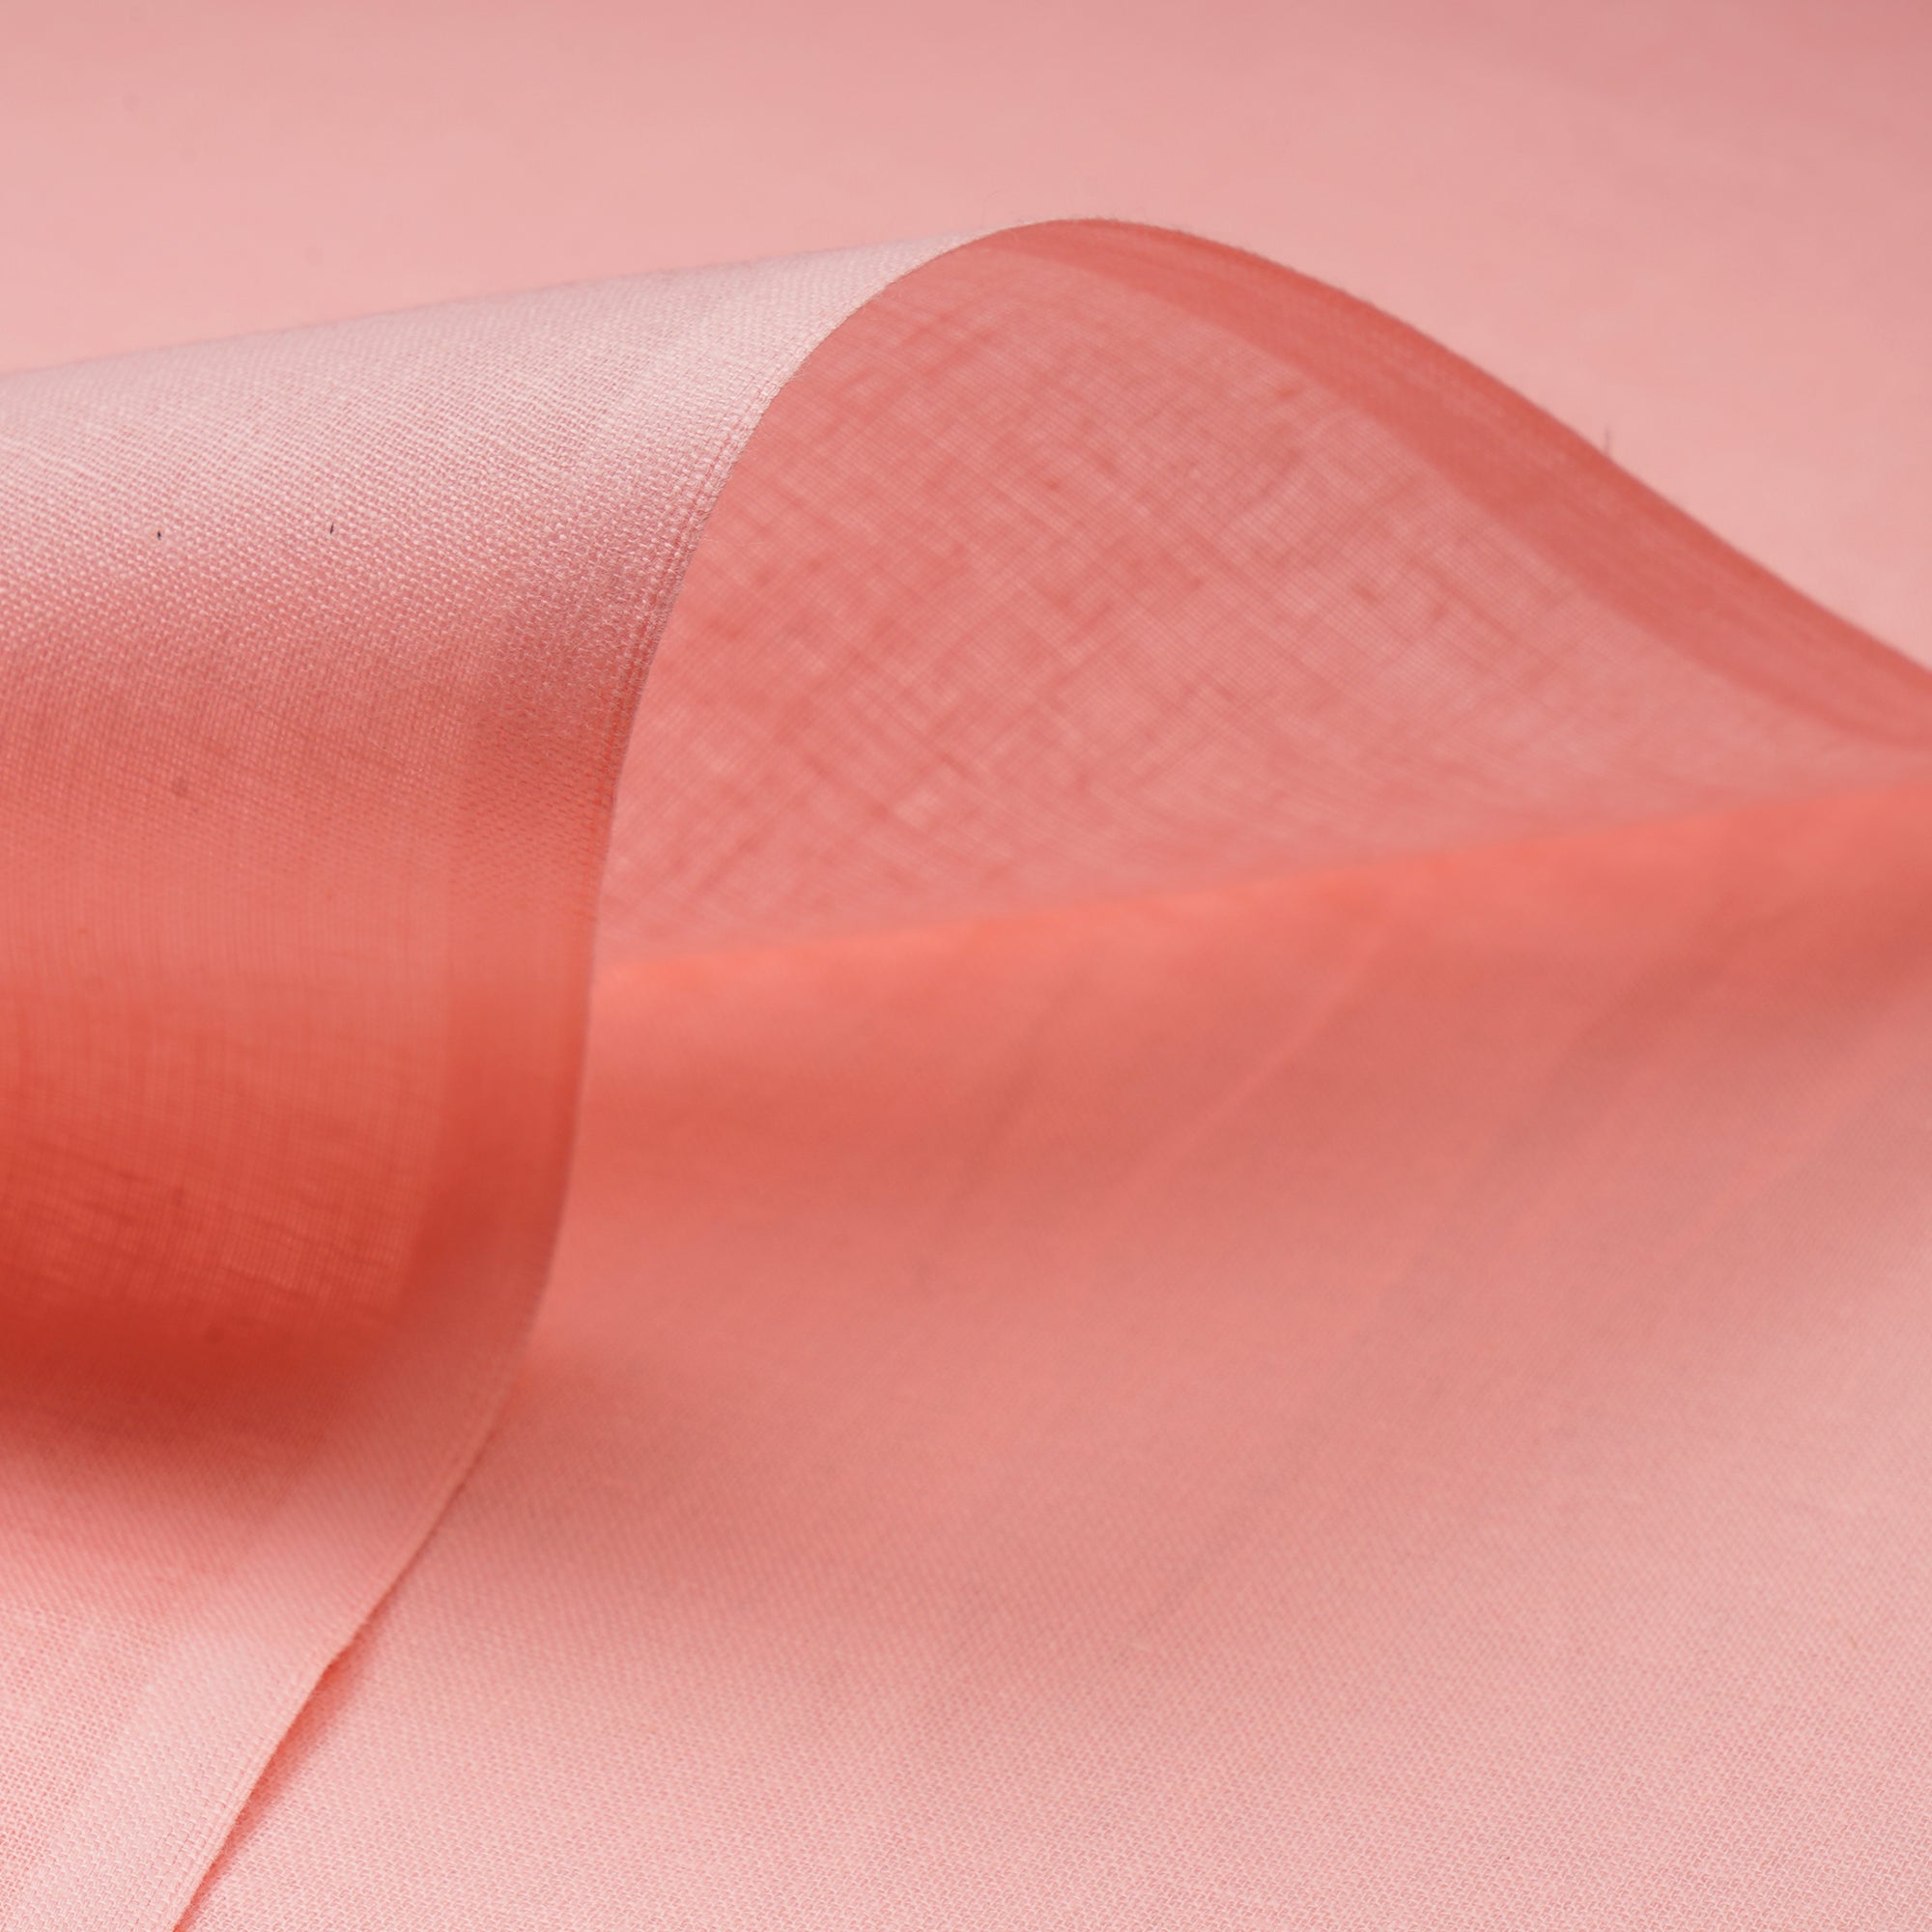 Salmon Mill Dyed Pure Cotton Lining Fabric